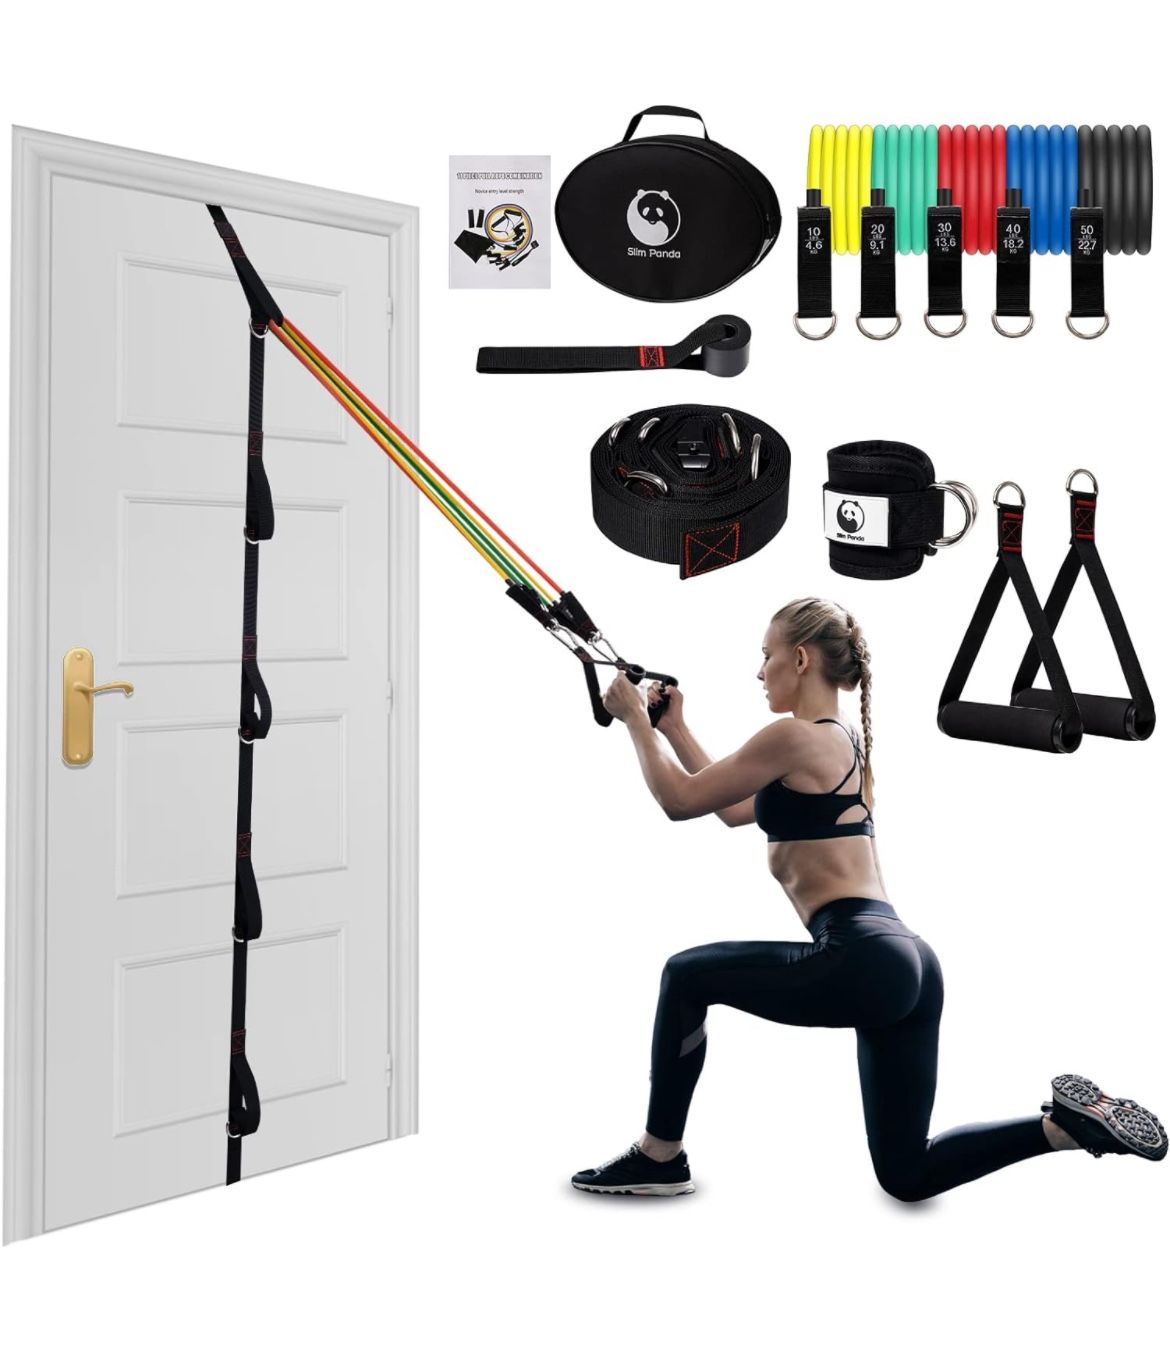 Slim Panda Door Anchor Strap for Resistance Bands, Portable Gym Attachment for Home Fitness, Multi Point Anchor Exercise Equipment, Door Anchor Resist